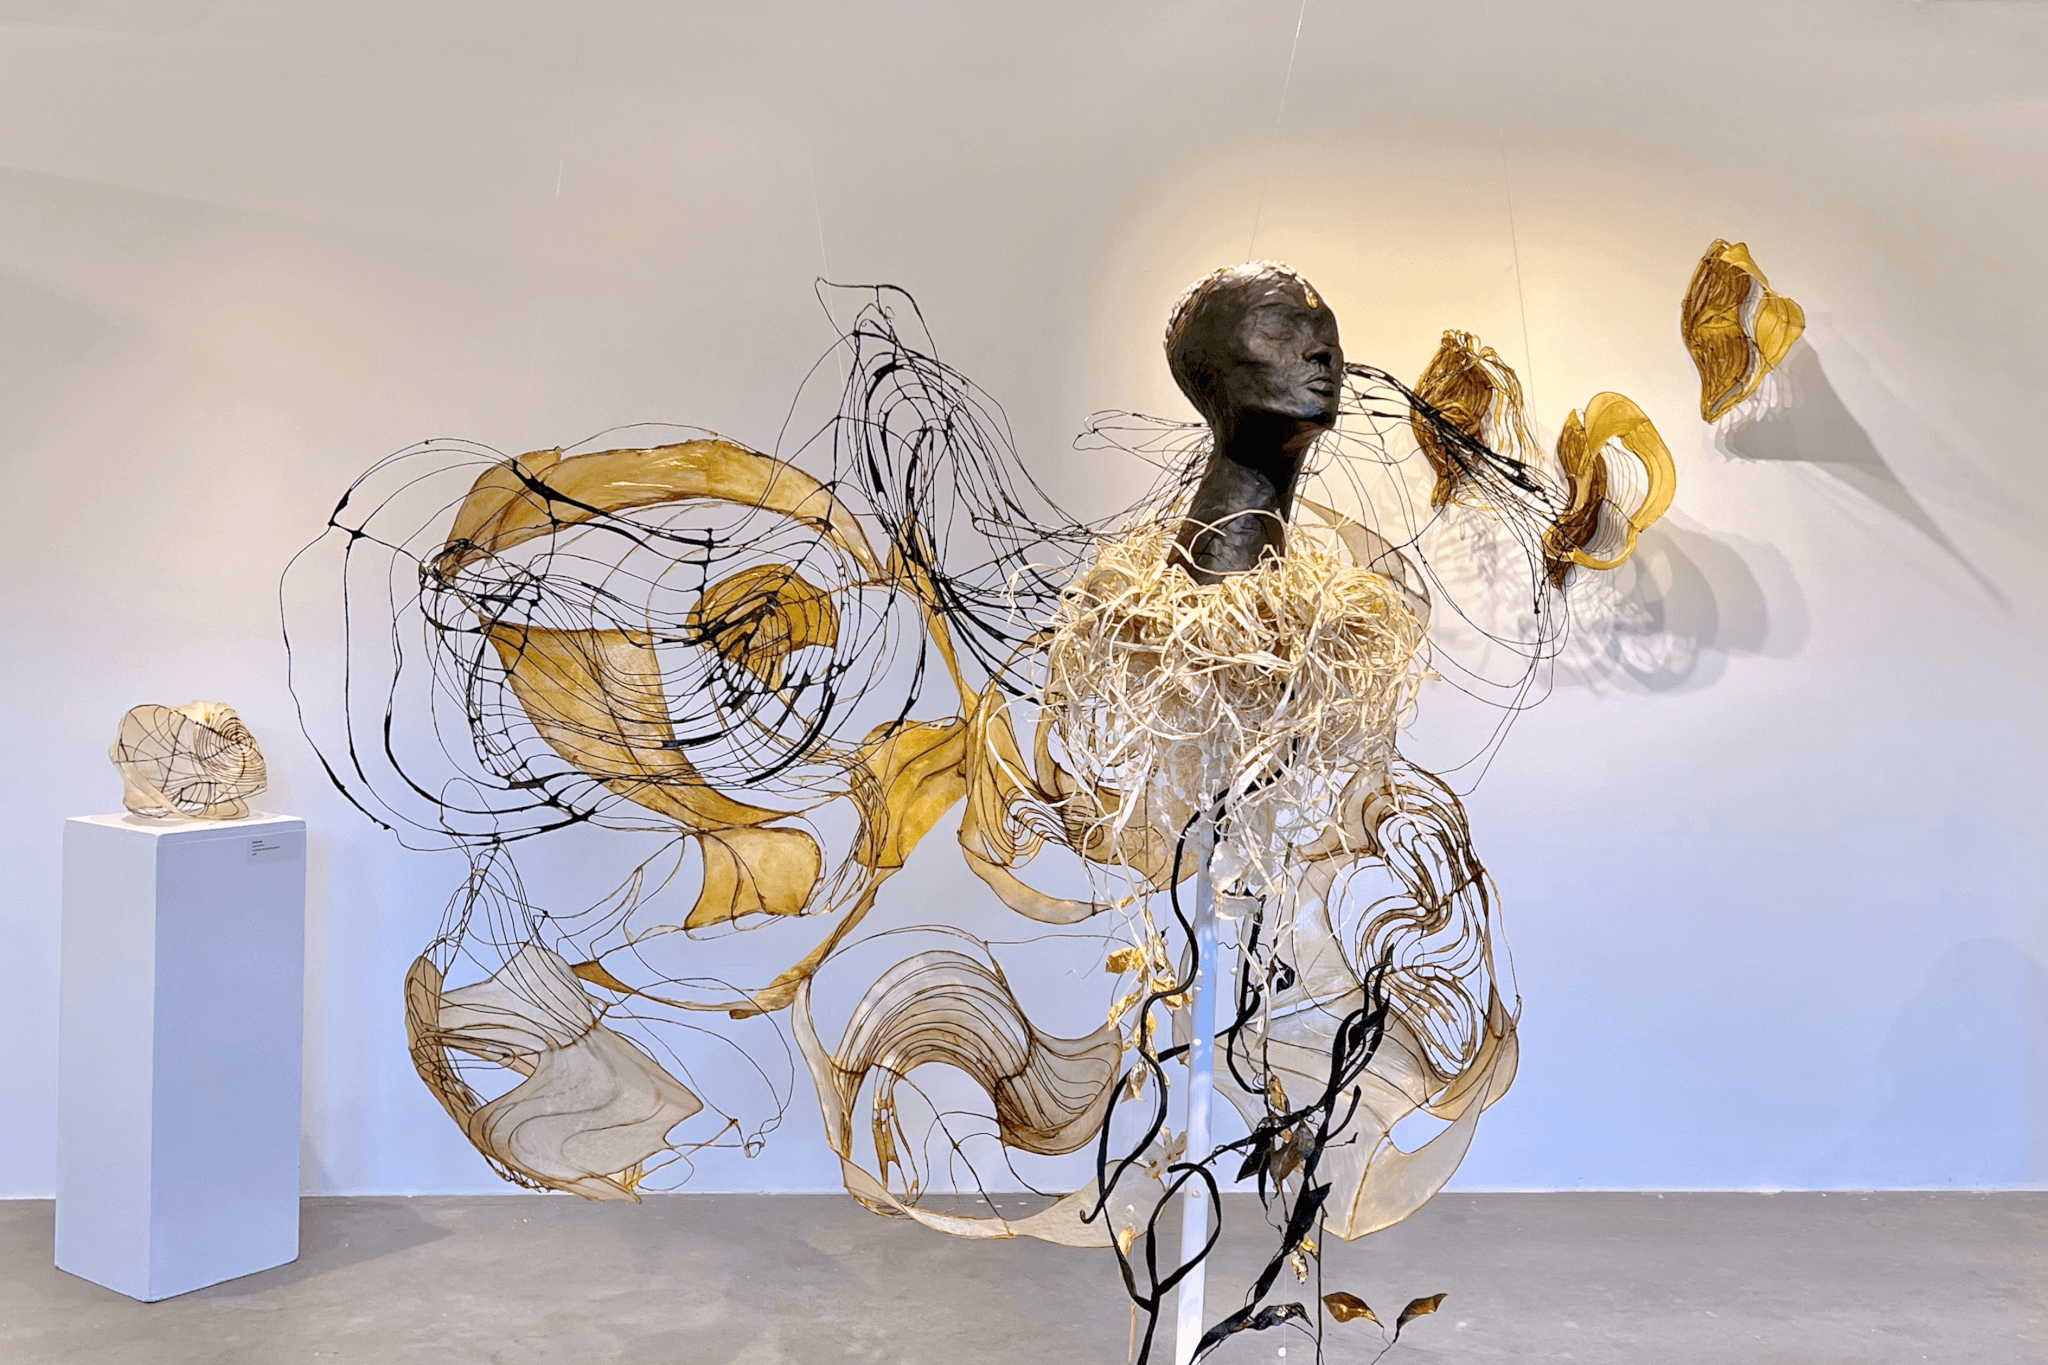 A swirling sculpture featuring the black form of an individual head arises in Fountain Street Gallery's space.